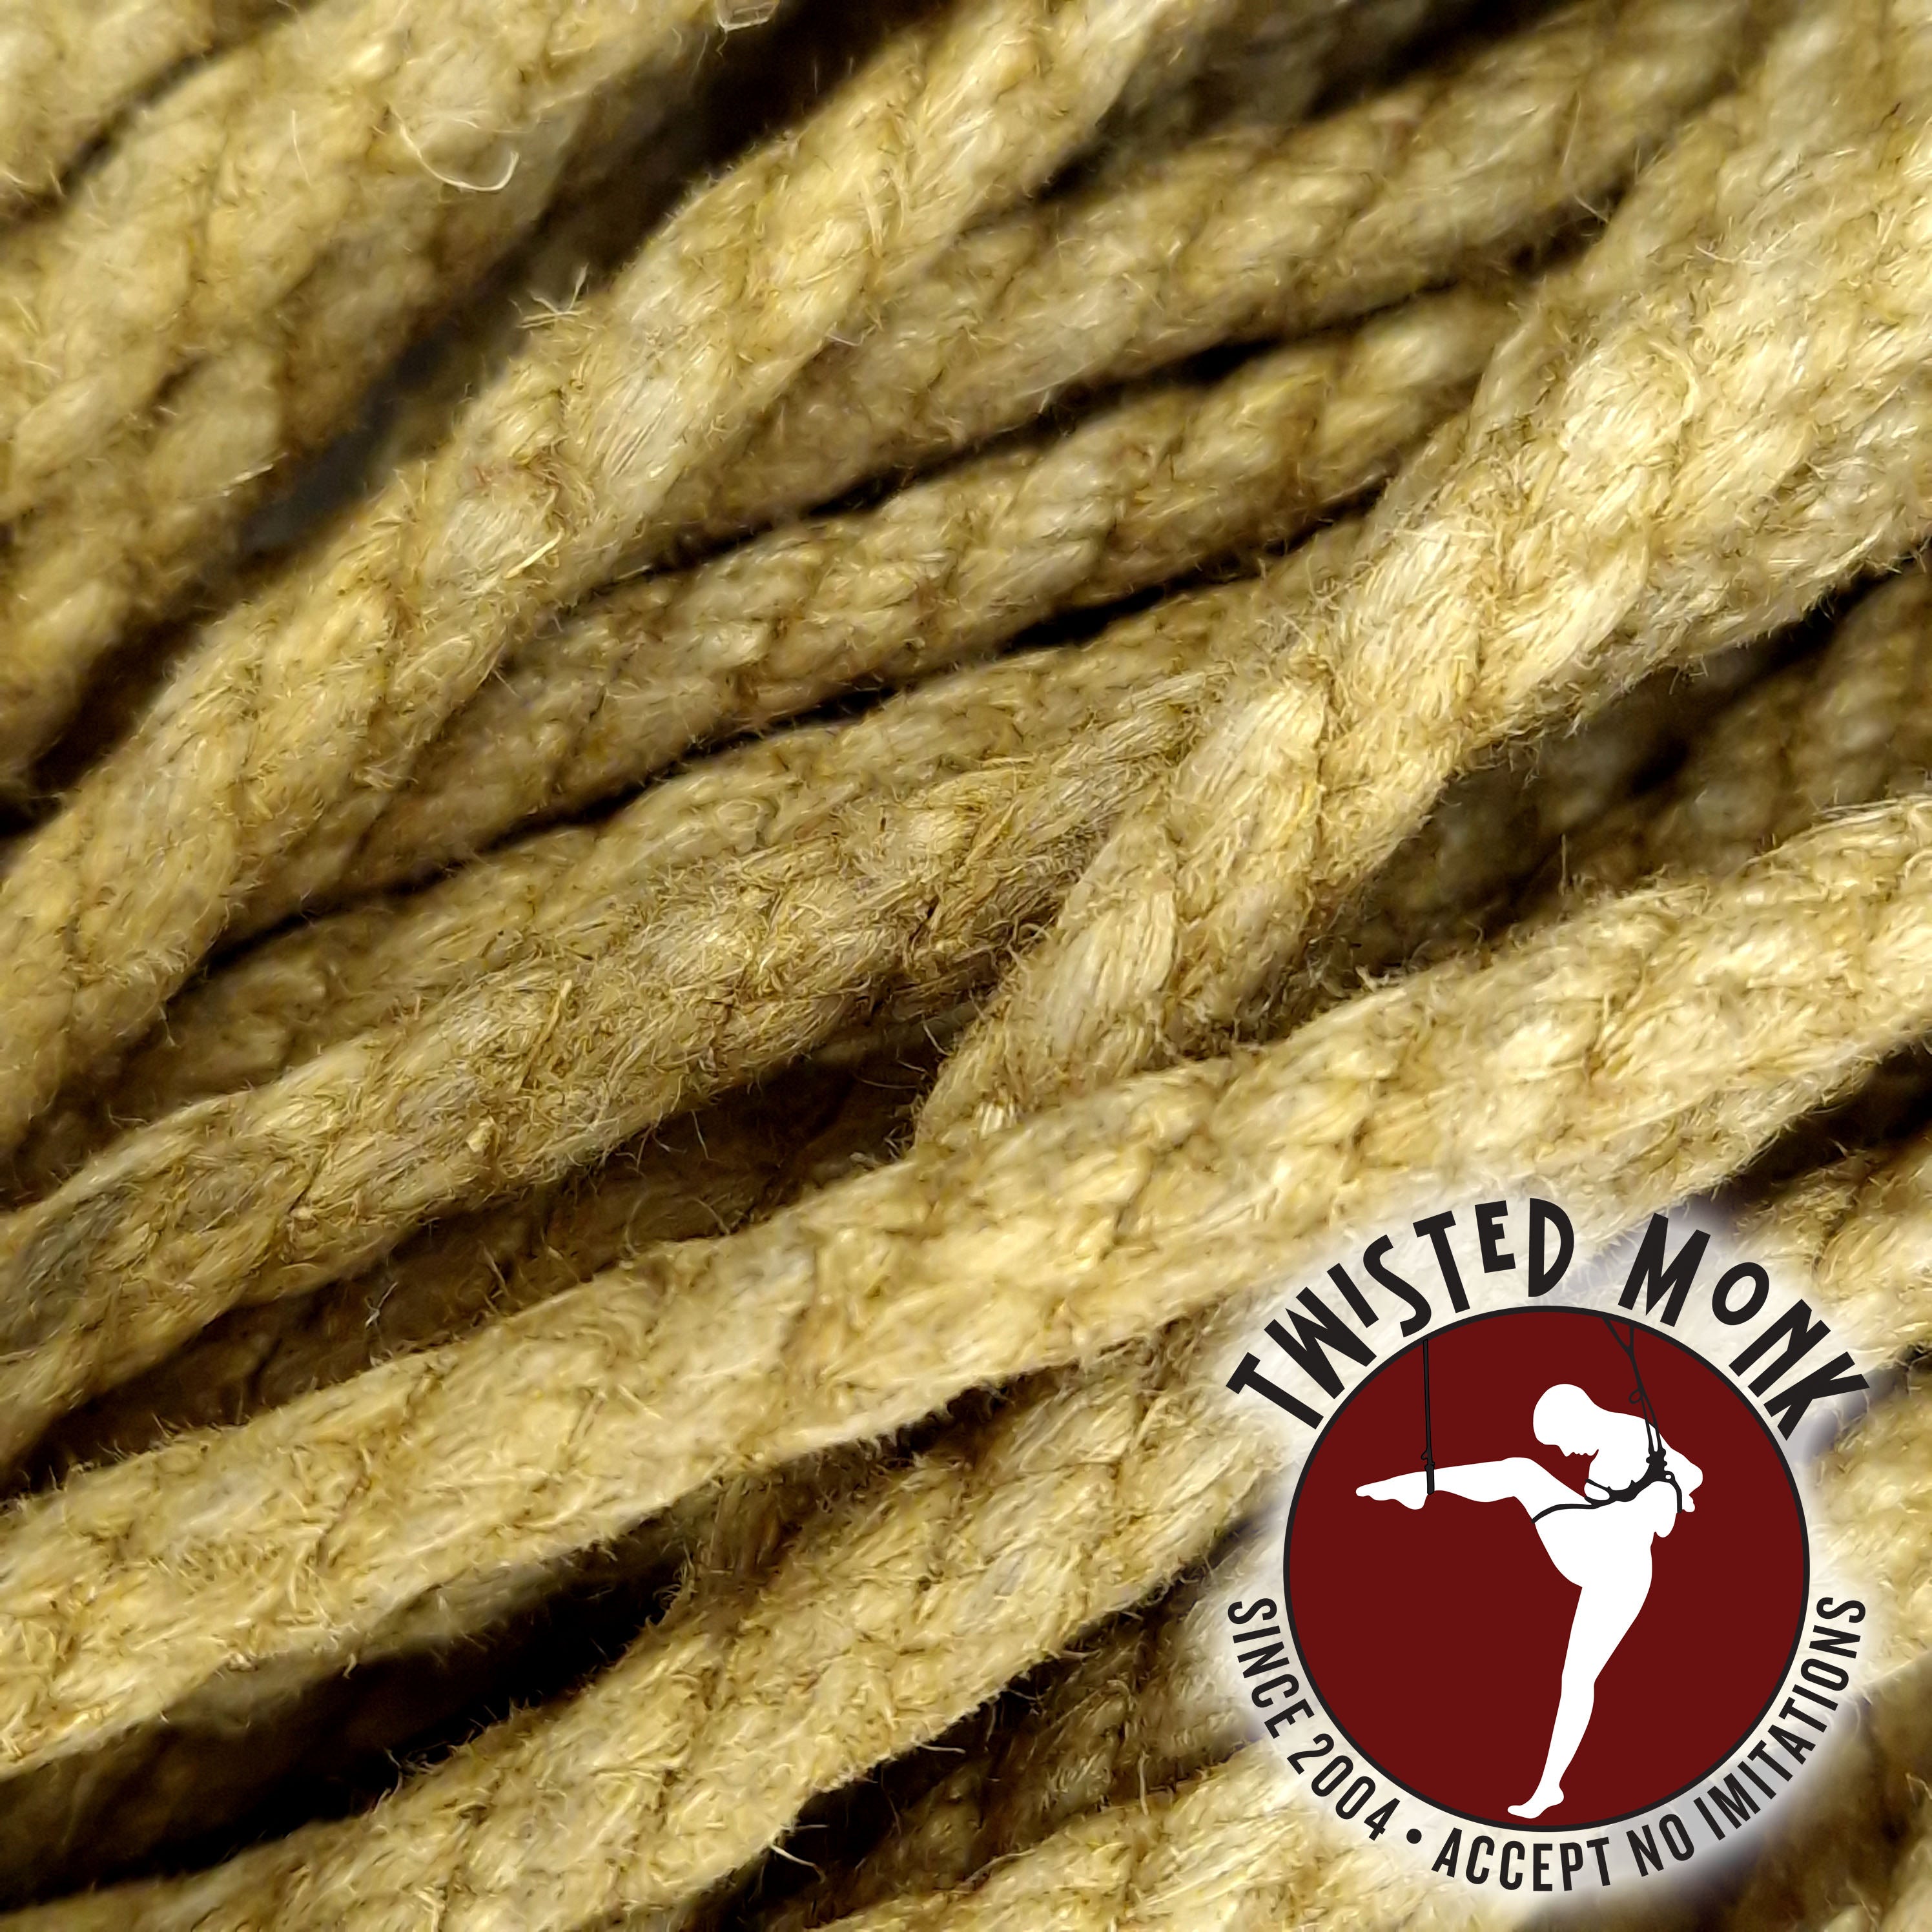 Thick Jute Hemp RopeThick Rope 8/10/12mm Natural Hemp Ropes Decking Jute  Rope 4 Strand Super Strong War Twisted Hemp Rope for Crafts 50M(Size:10MM